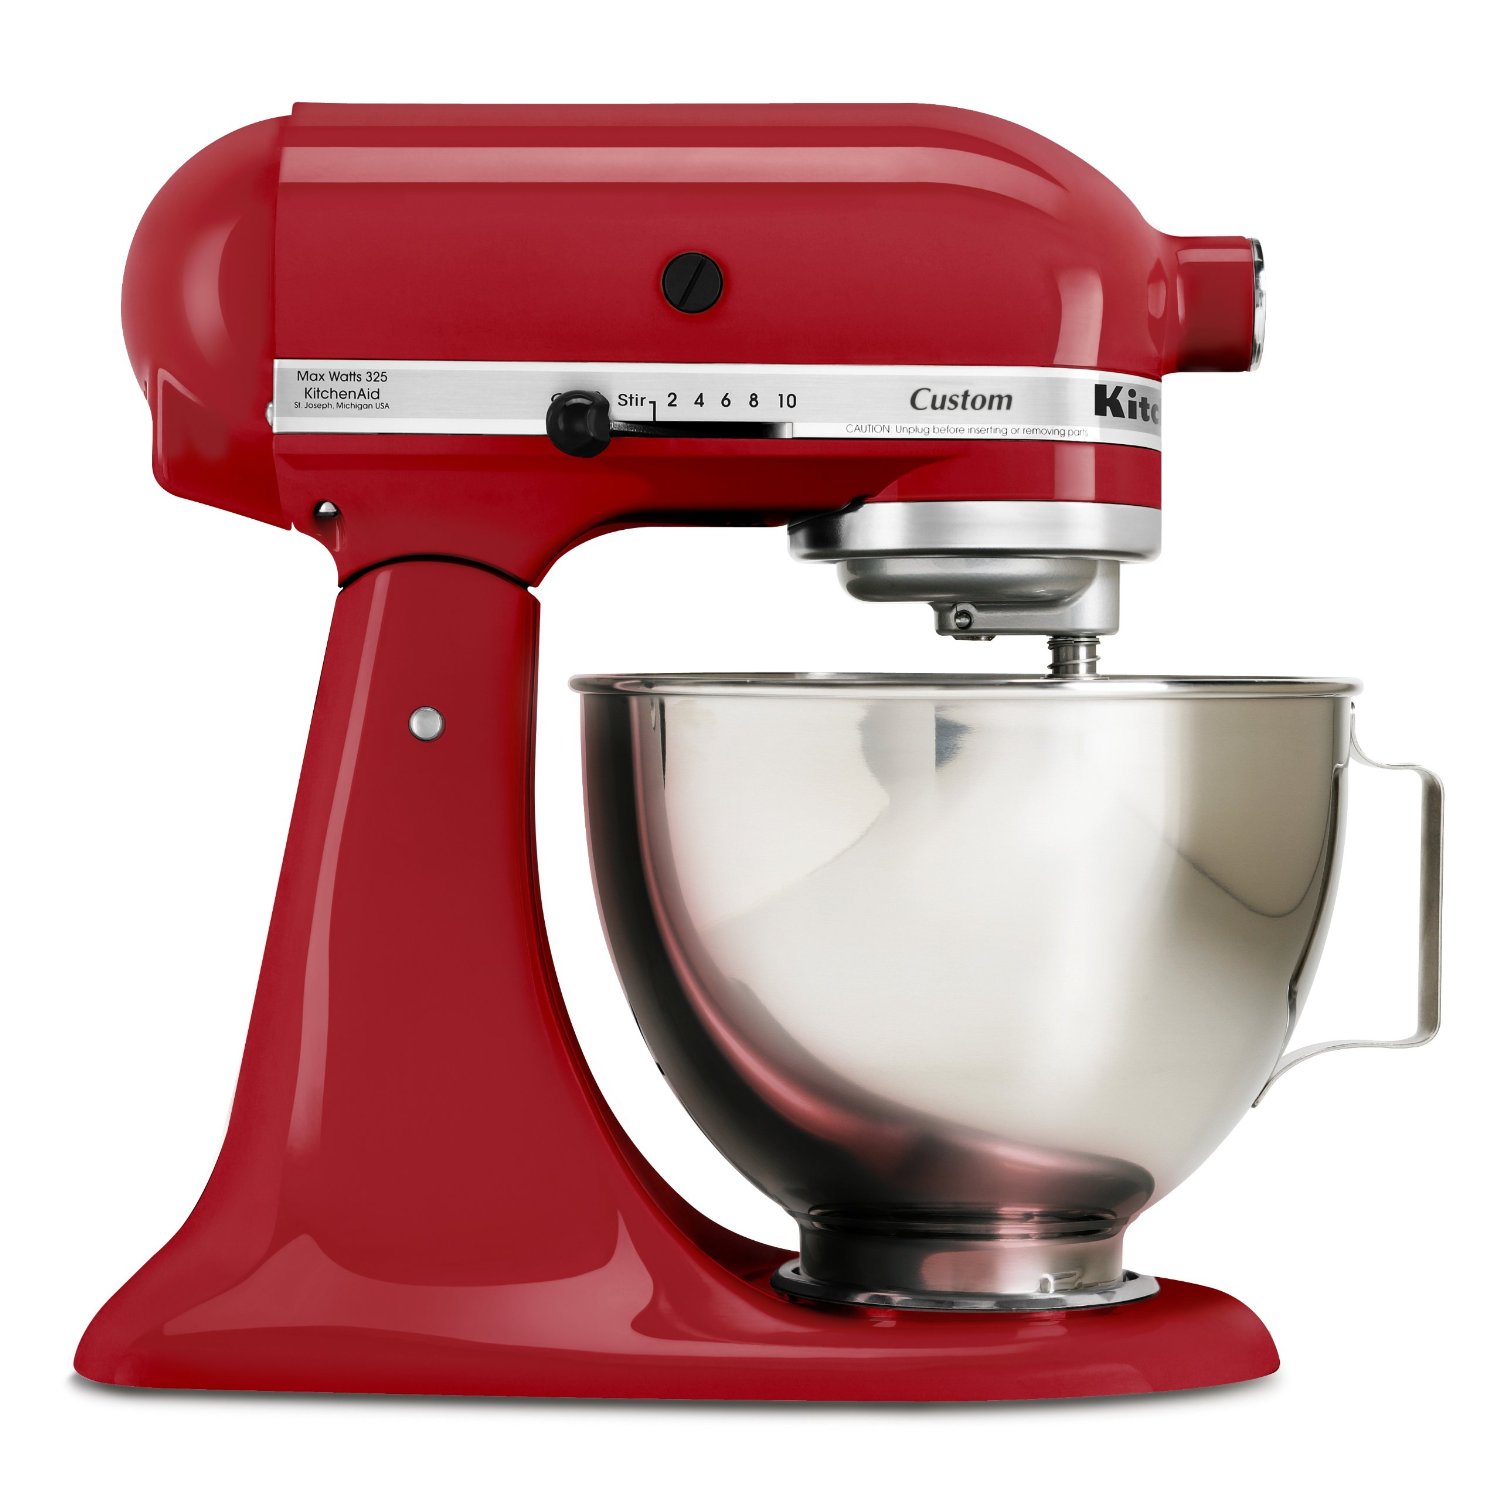 Amazon.ca Kitchenaid Mixer $199.99-$219.99 and other Cyber Monday Deals ...